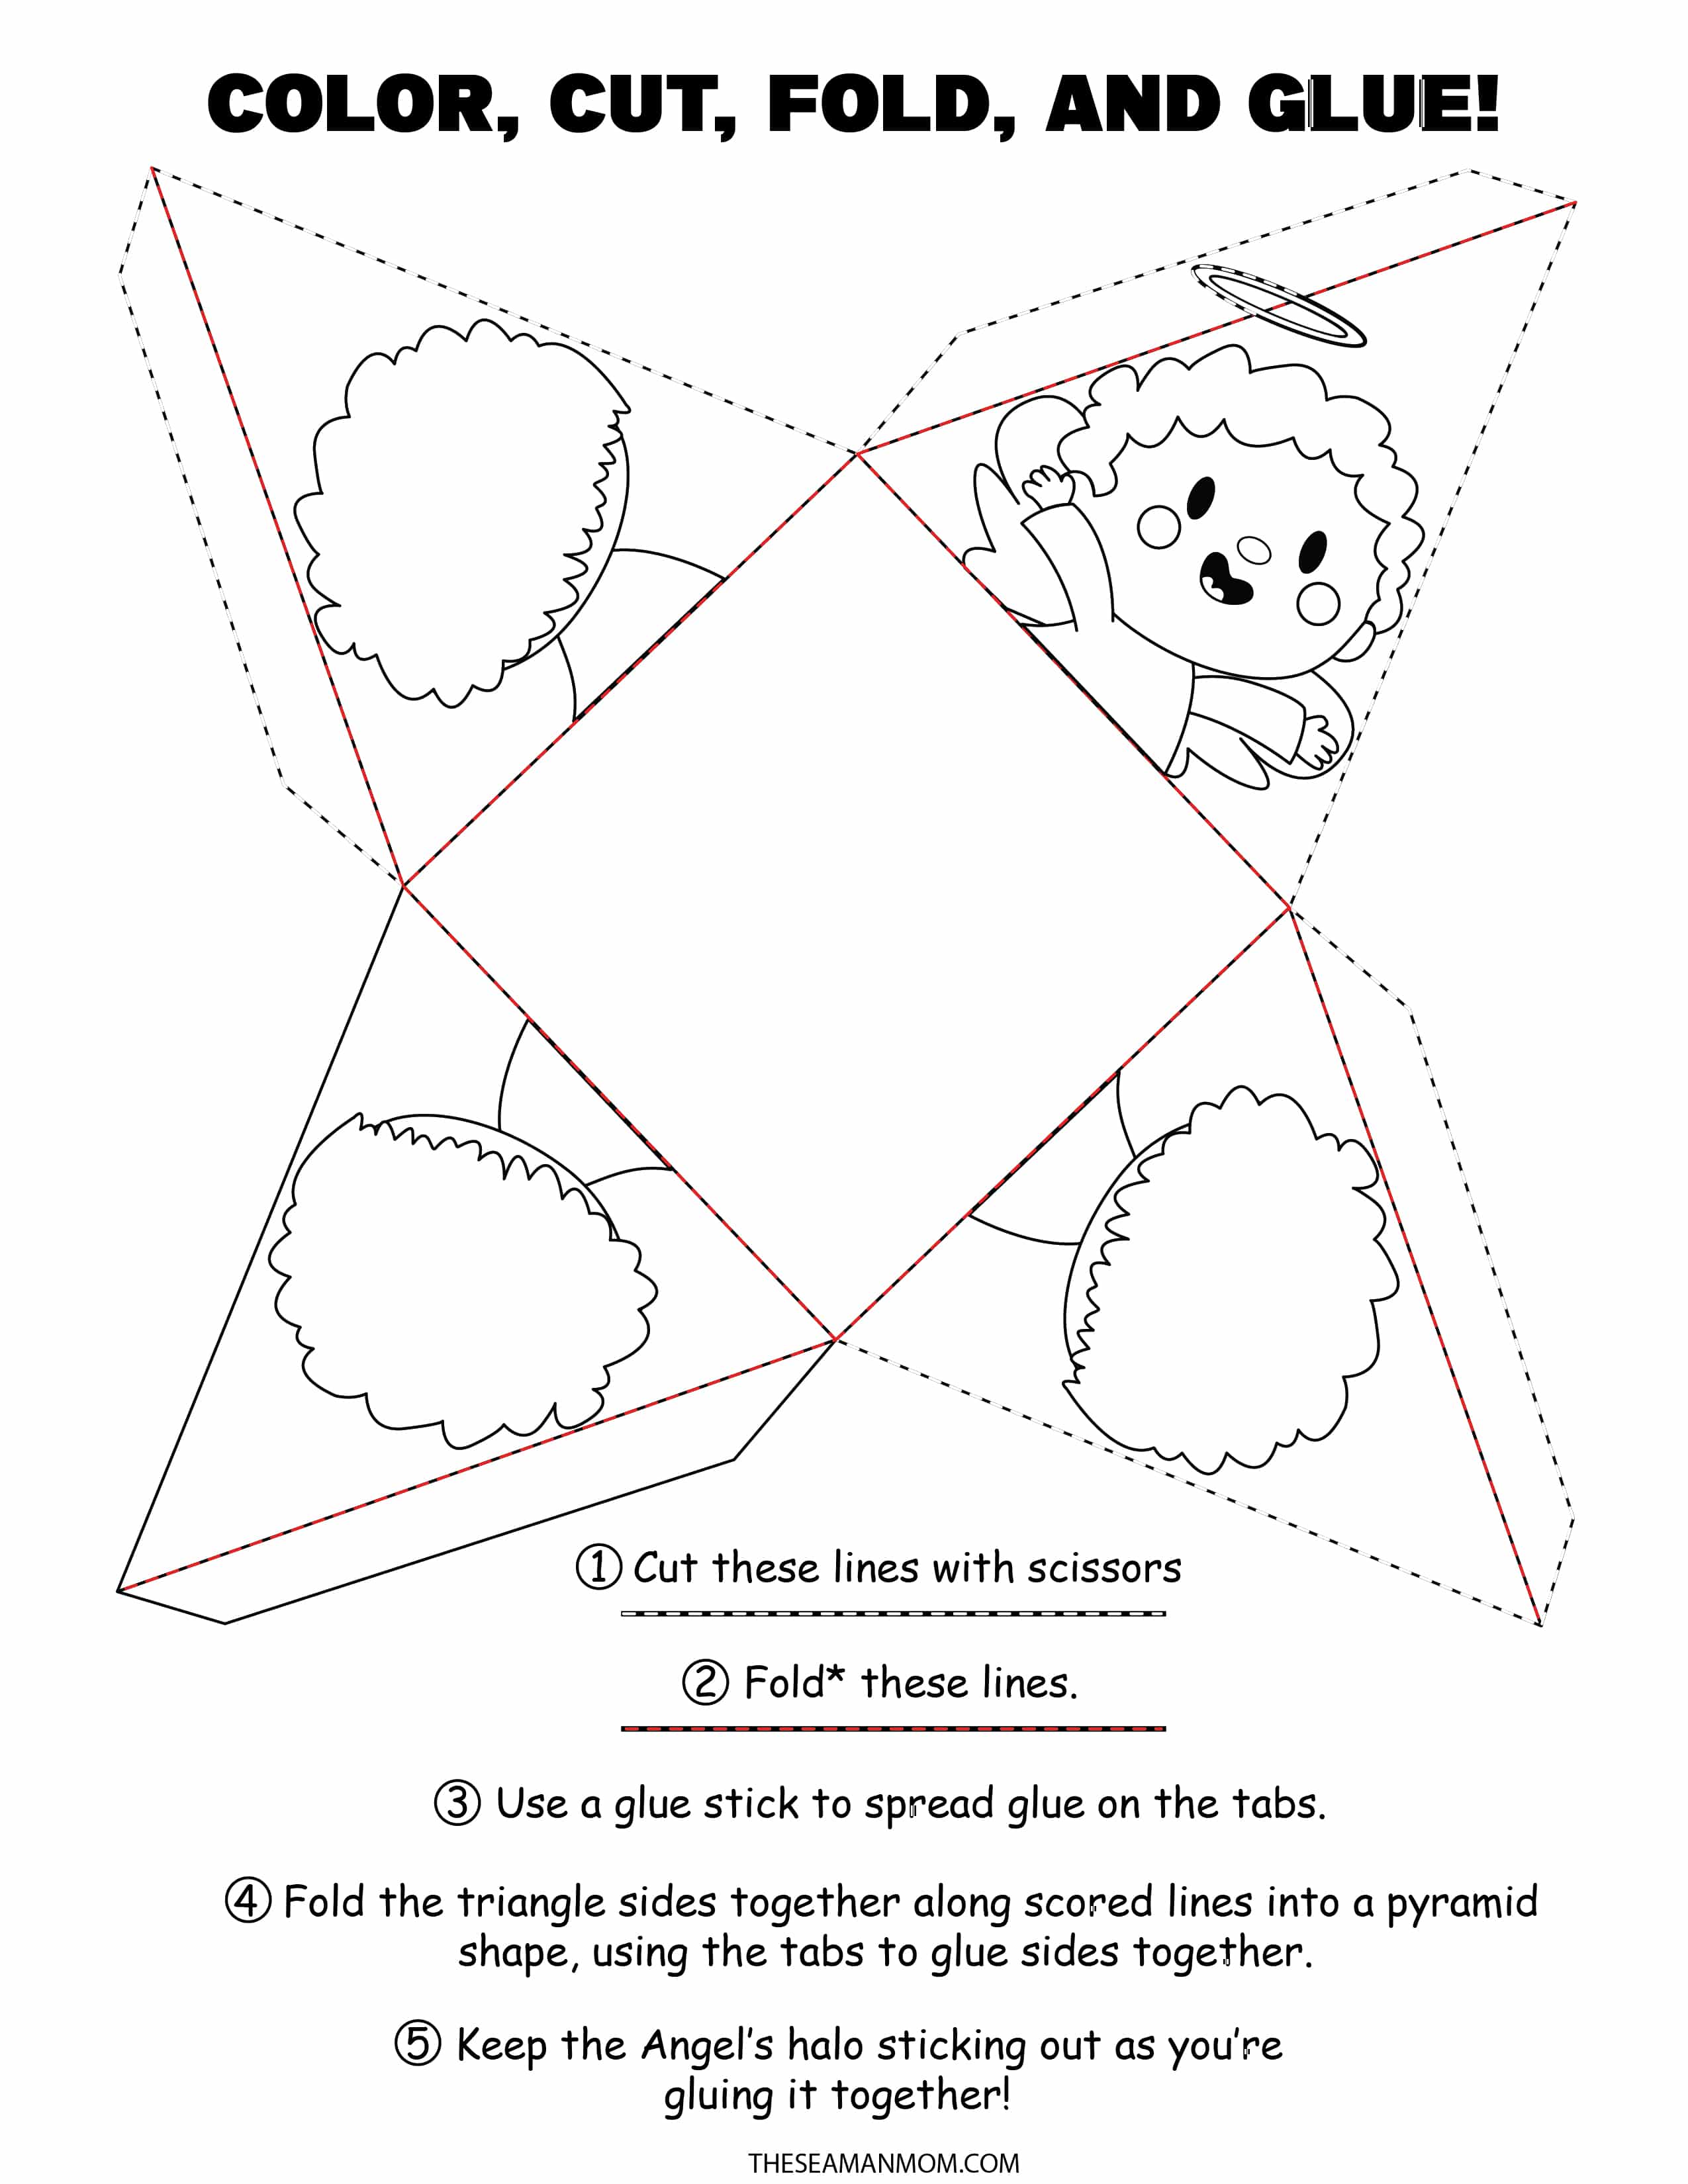 Printable angel ornaments to color, cut, fold and glue and make your own tree ornaments